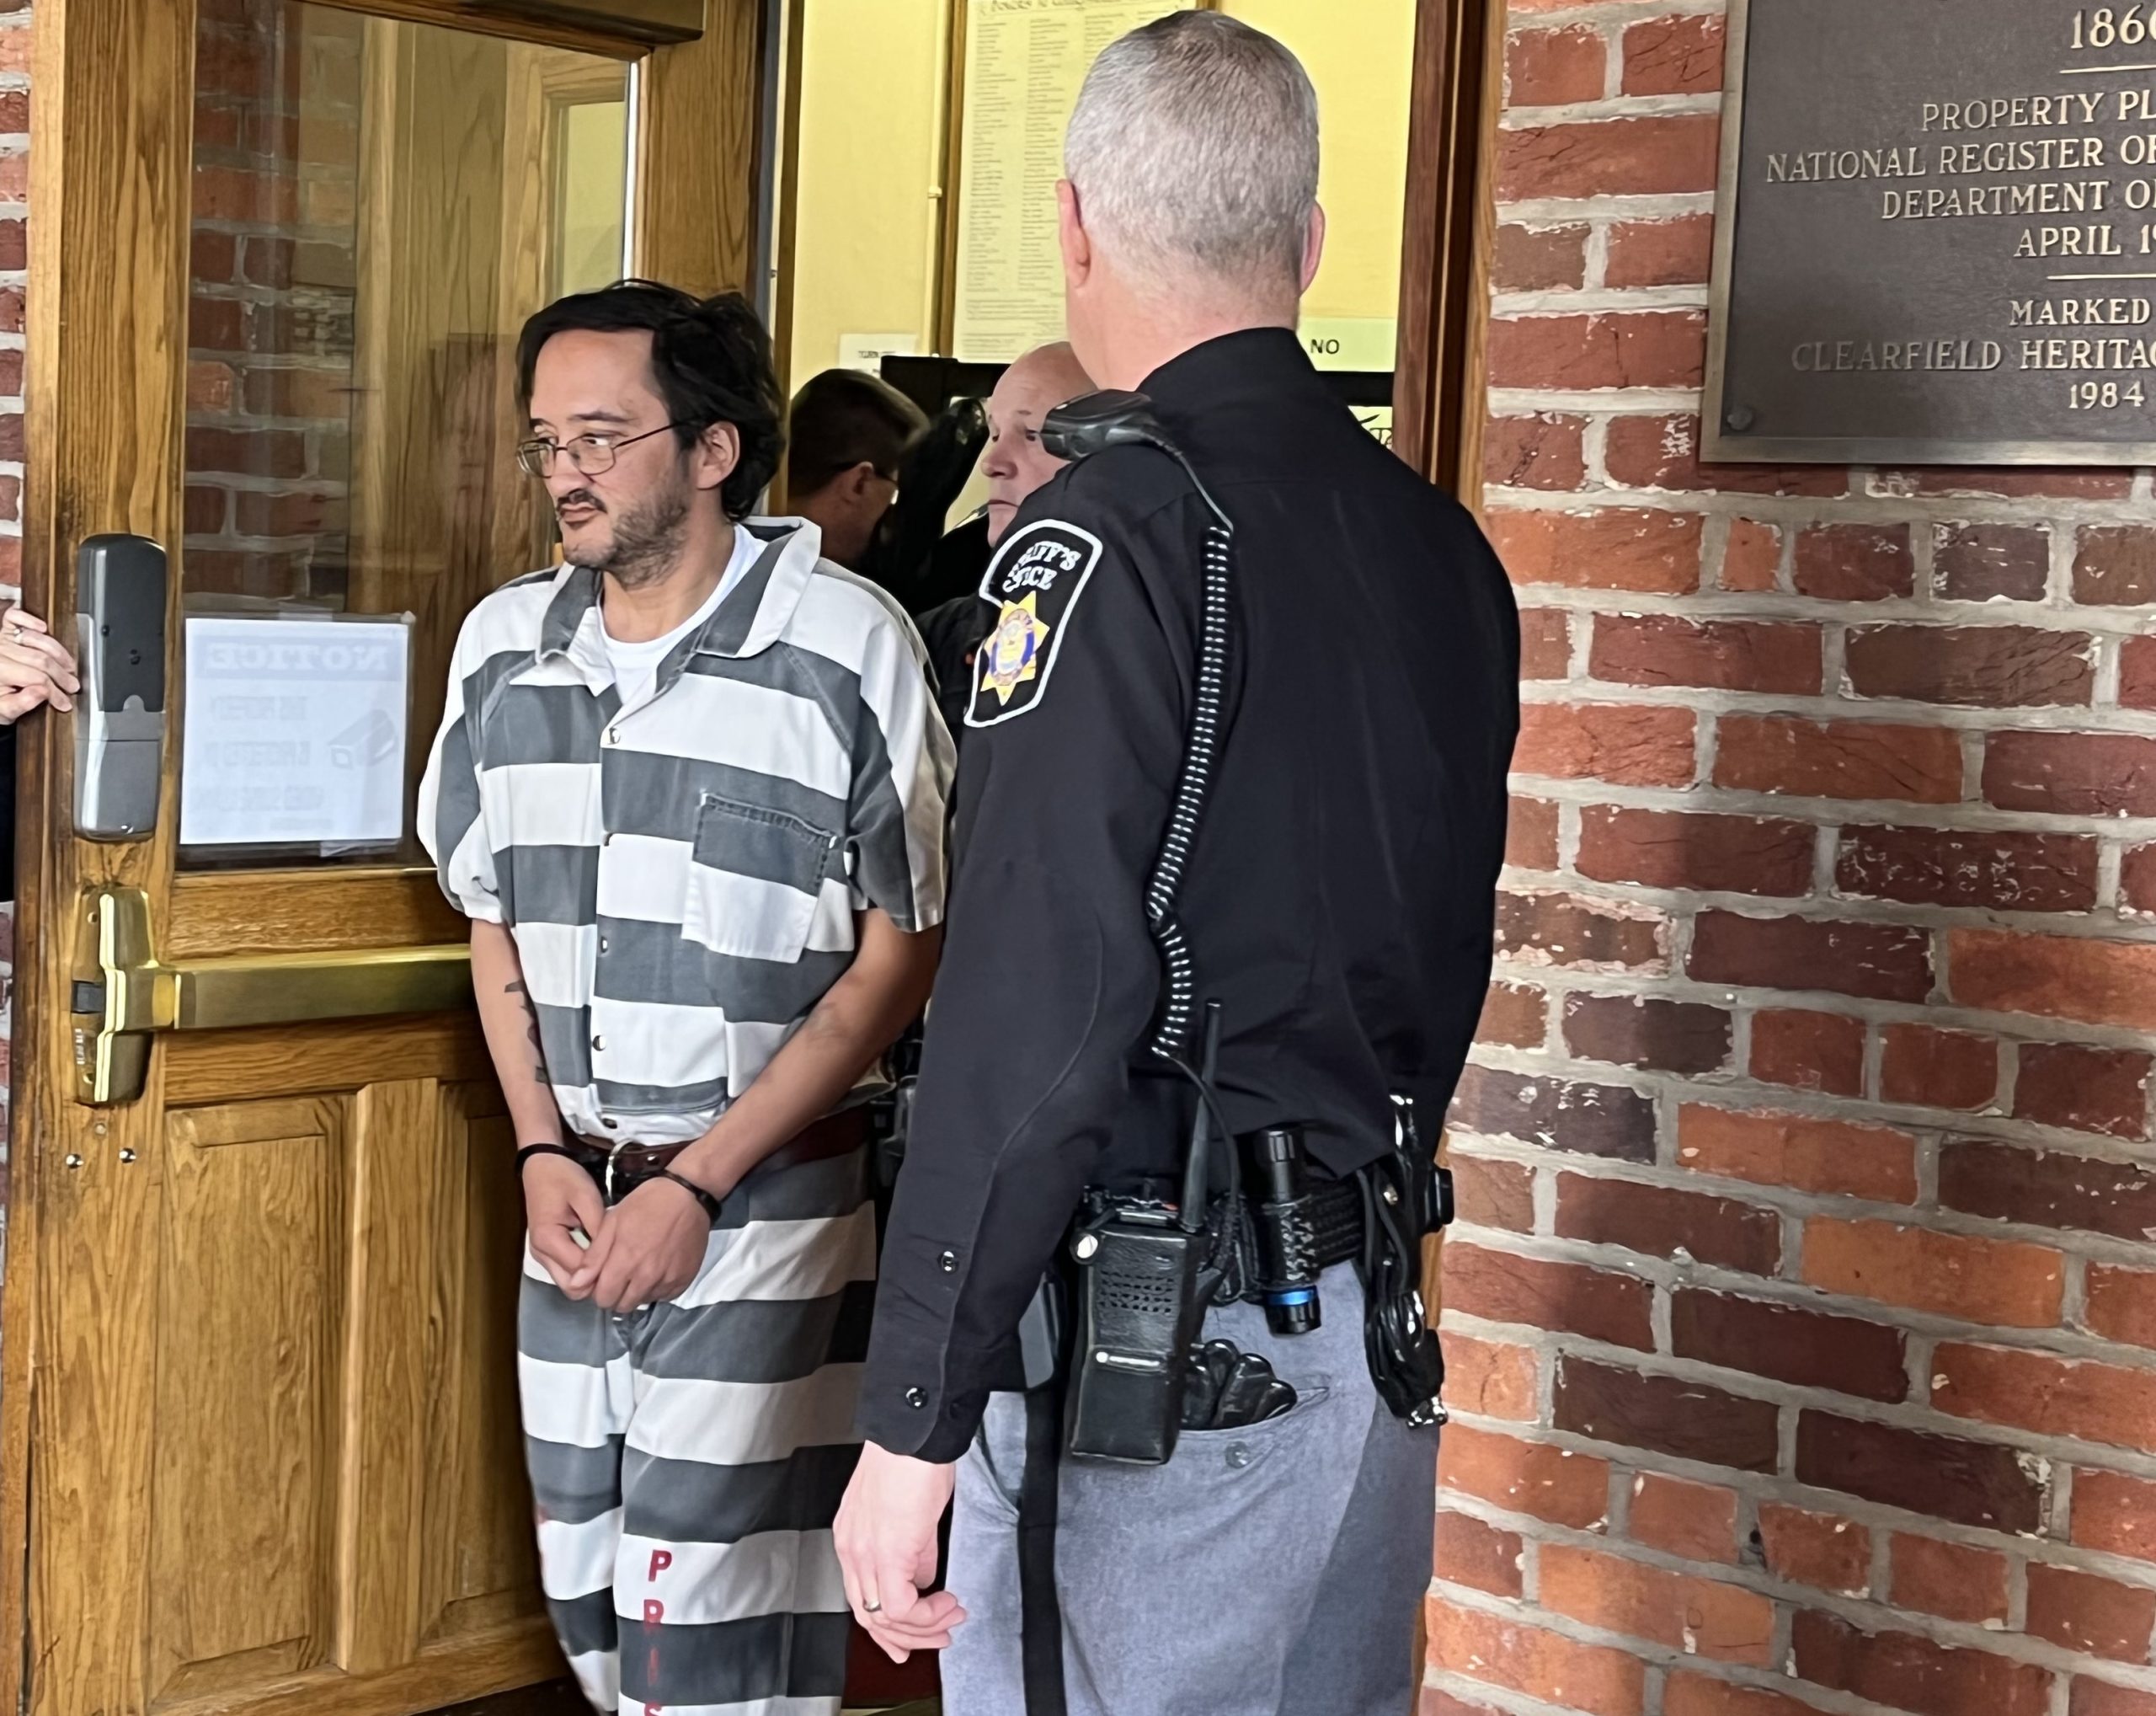 Clearfield Man Headed to County Court for Mother’s Alleged Murder